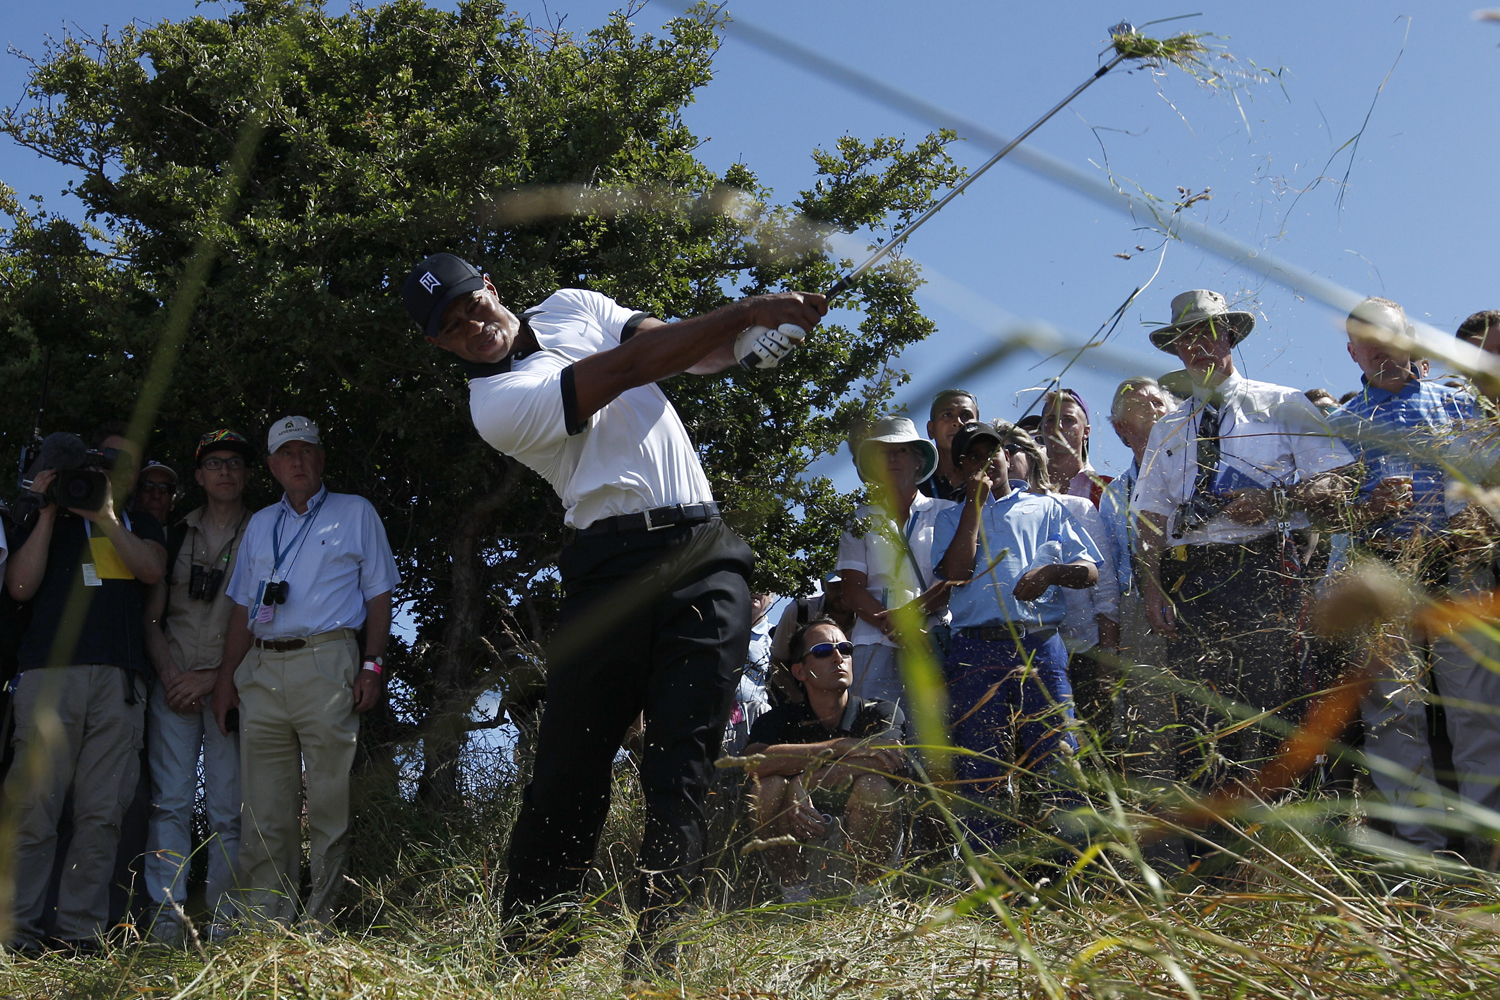 July 18, 2013. Tiger Woods of the United States plays out of the rough on the first fairway during the first round of the British Open Golf Championship at Muirfield, Scotland.